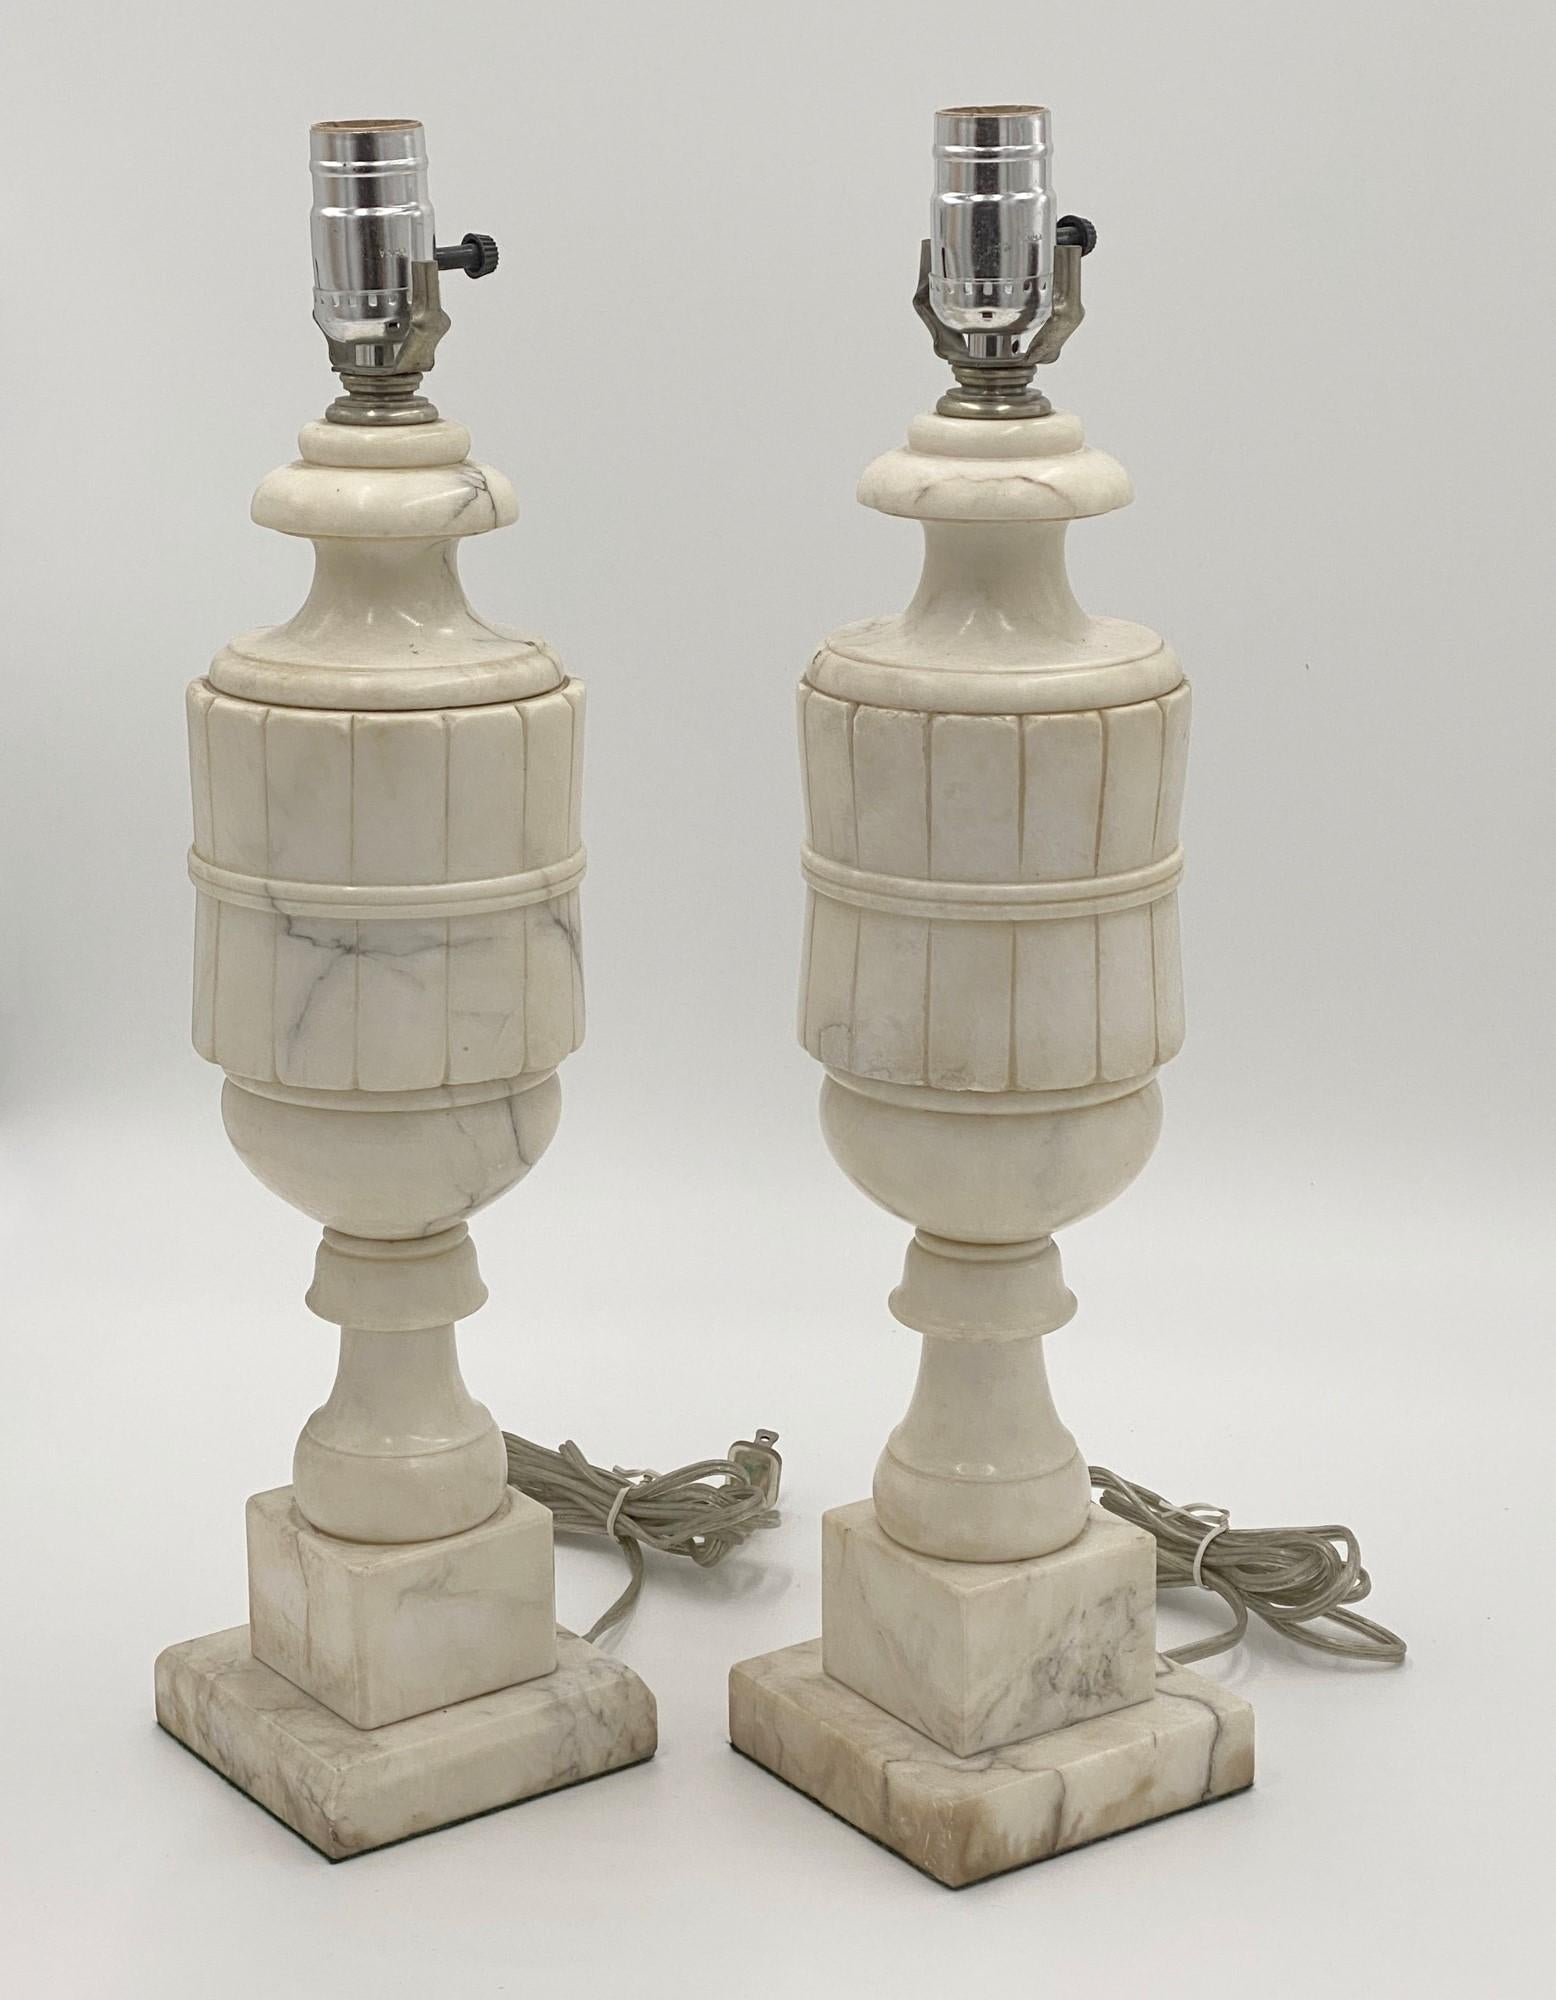 1920s table lamps carved out of alabaster. Sold as a pair. This can be seen at our 333 West 52nd St location in the Theater District West of Manhattan.